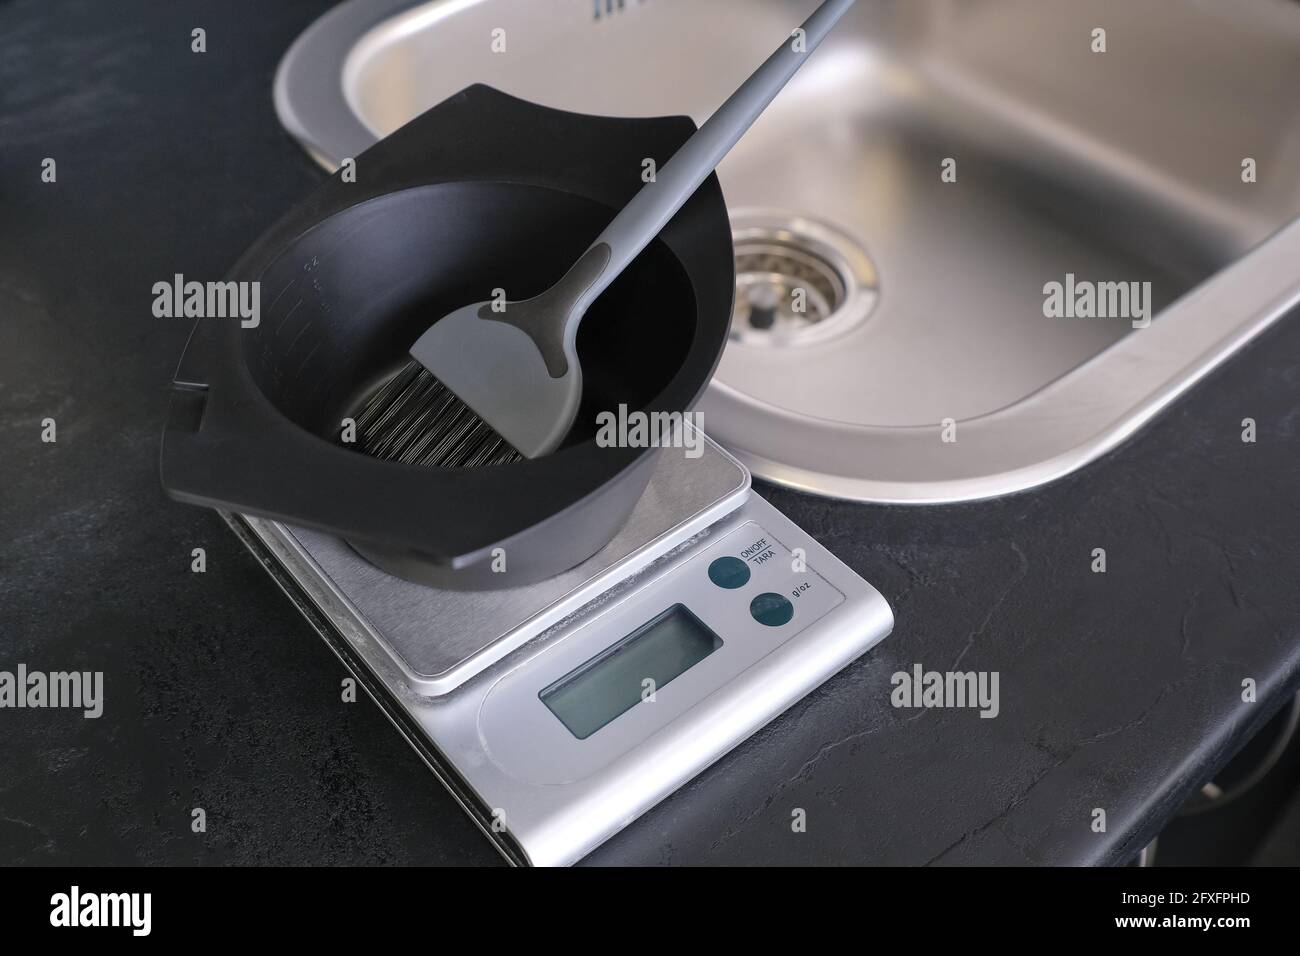 Hair dye measuring and mixing kit. Mixing bowl and hair dye brush on  electronic scale. Hair coloring tools set. Professional instrument for hair  color Stock Photo - Alamy